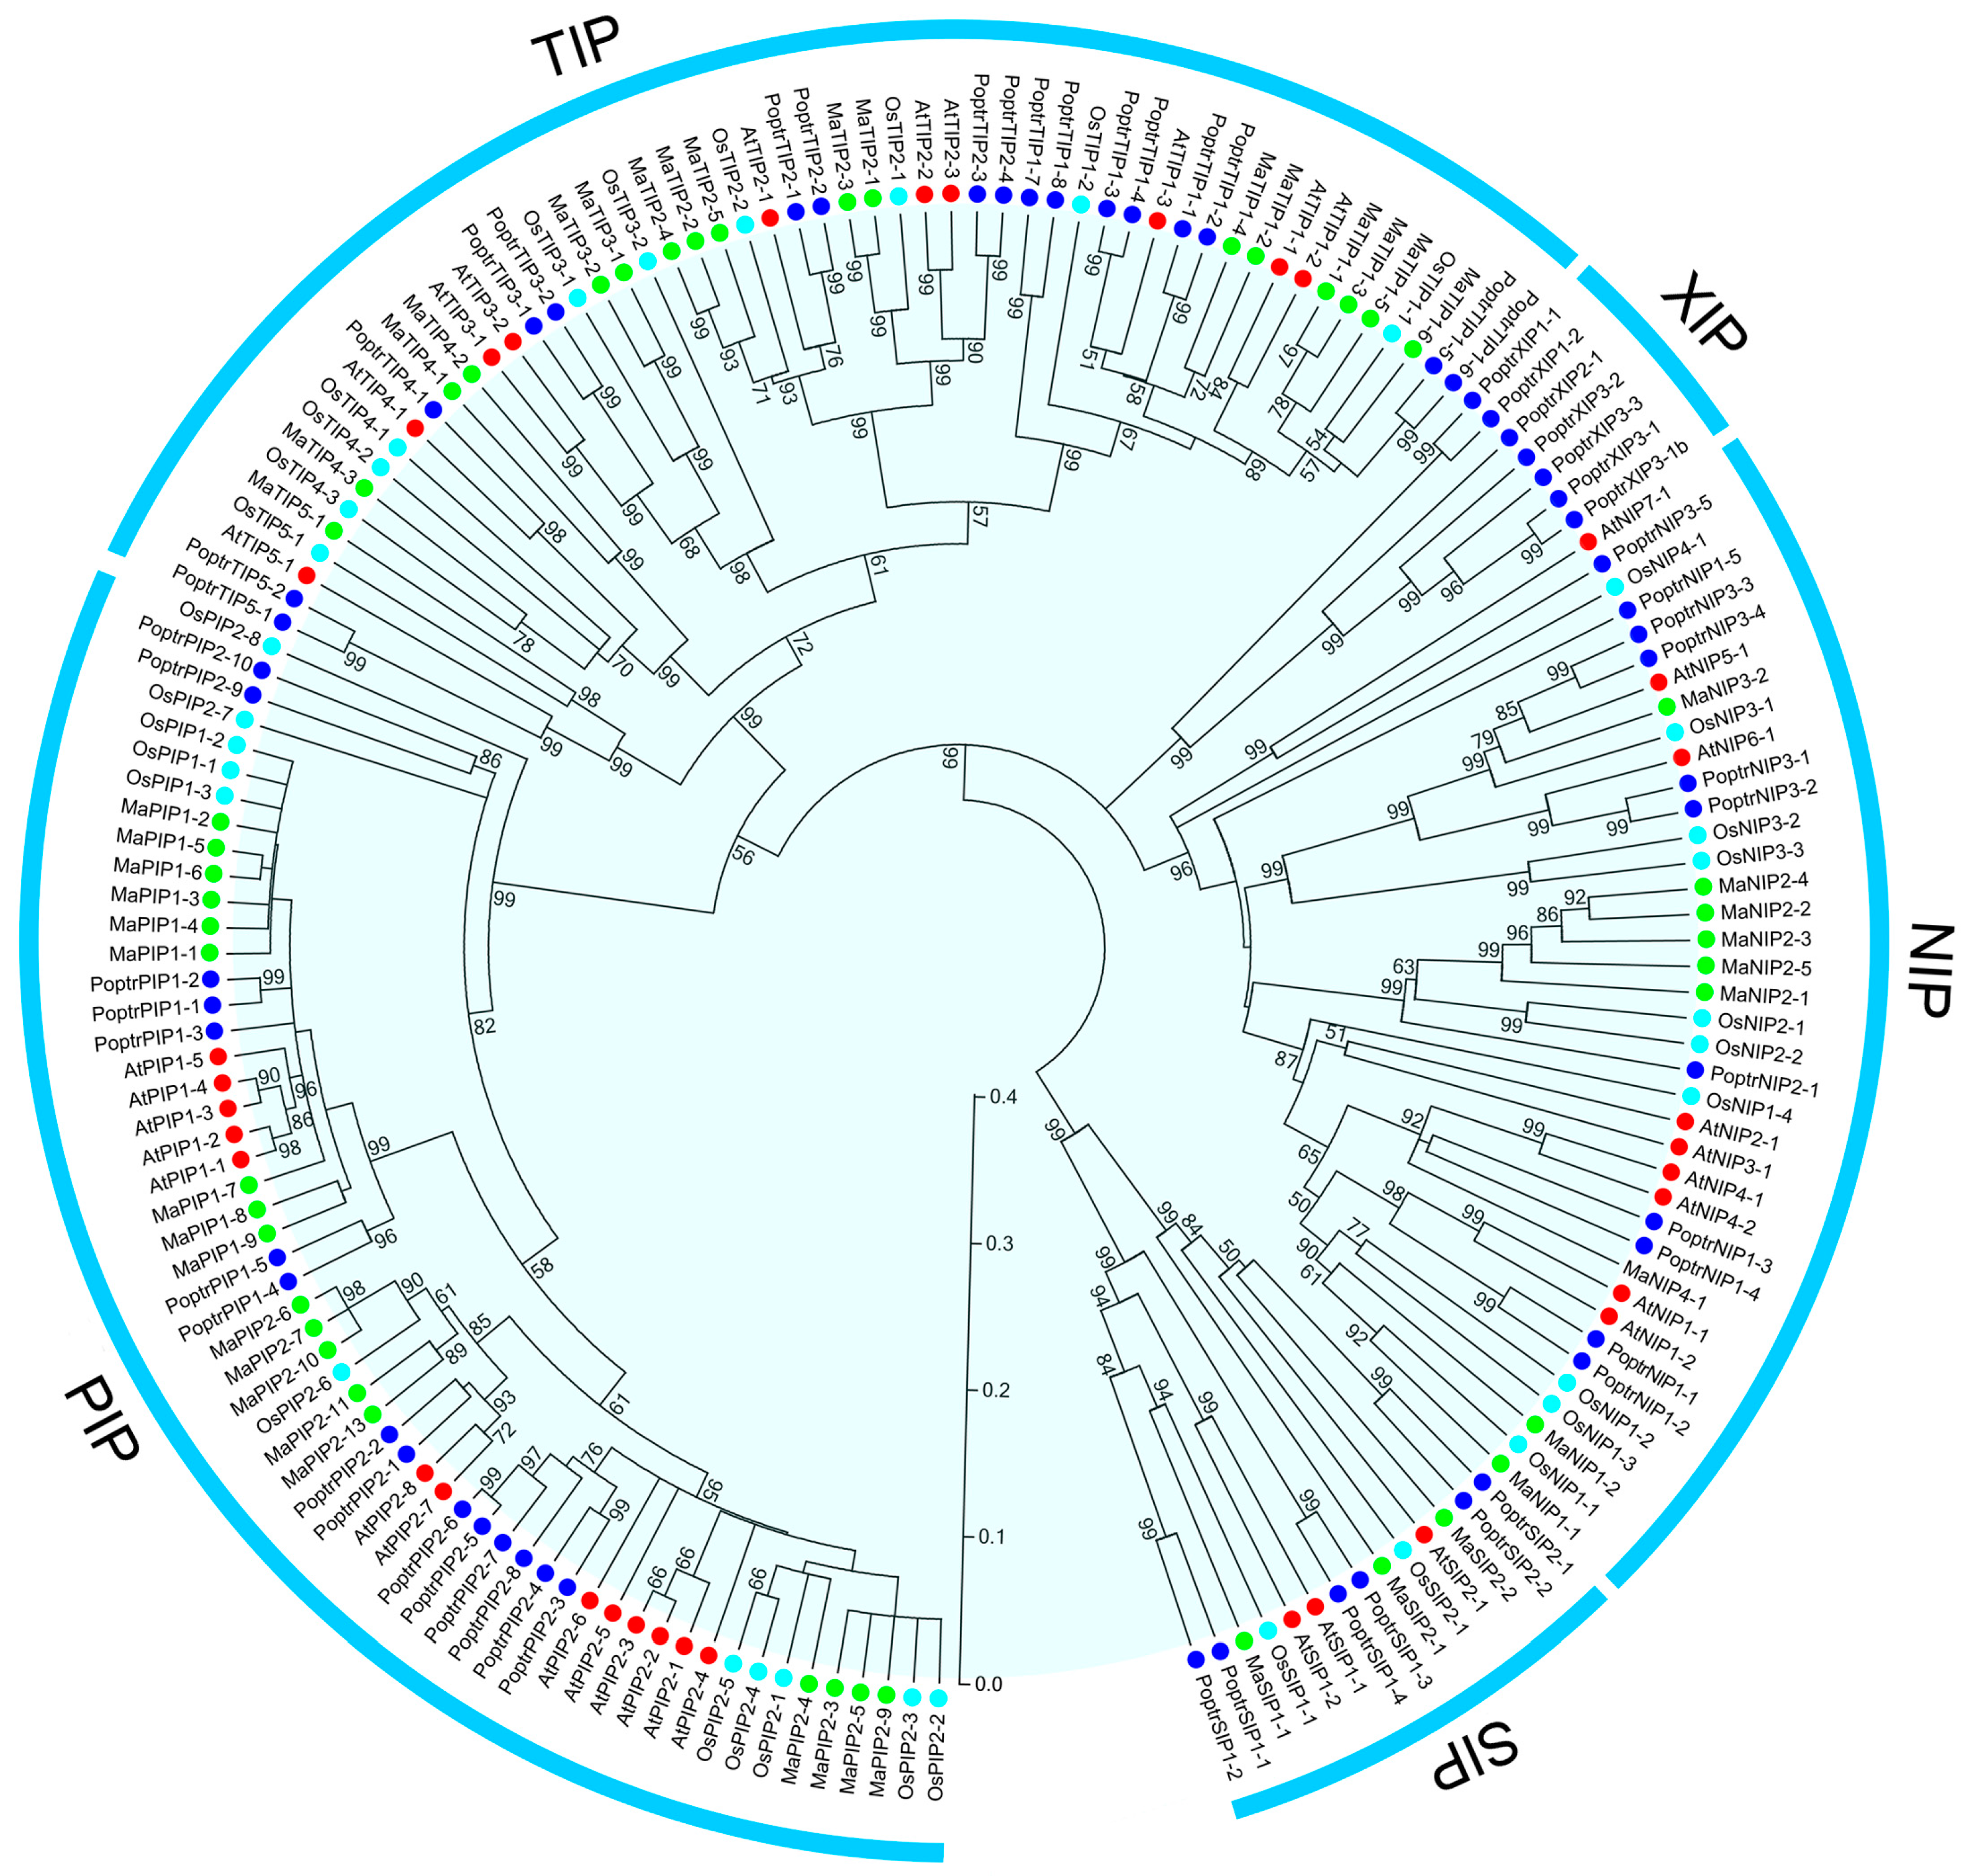 Ijms Free Full Text Genome Wide Identification And Expression Analyses Of Aquaporin Gene Family During Development And Abiotic Stress In Banana Html